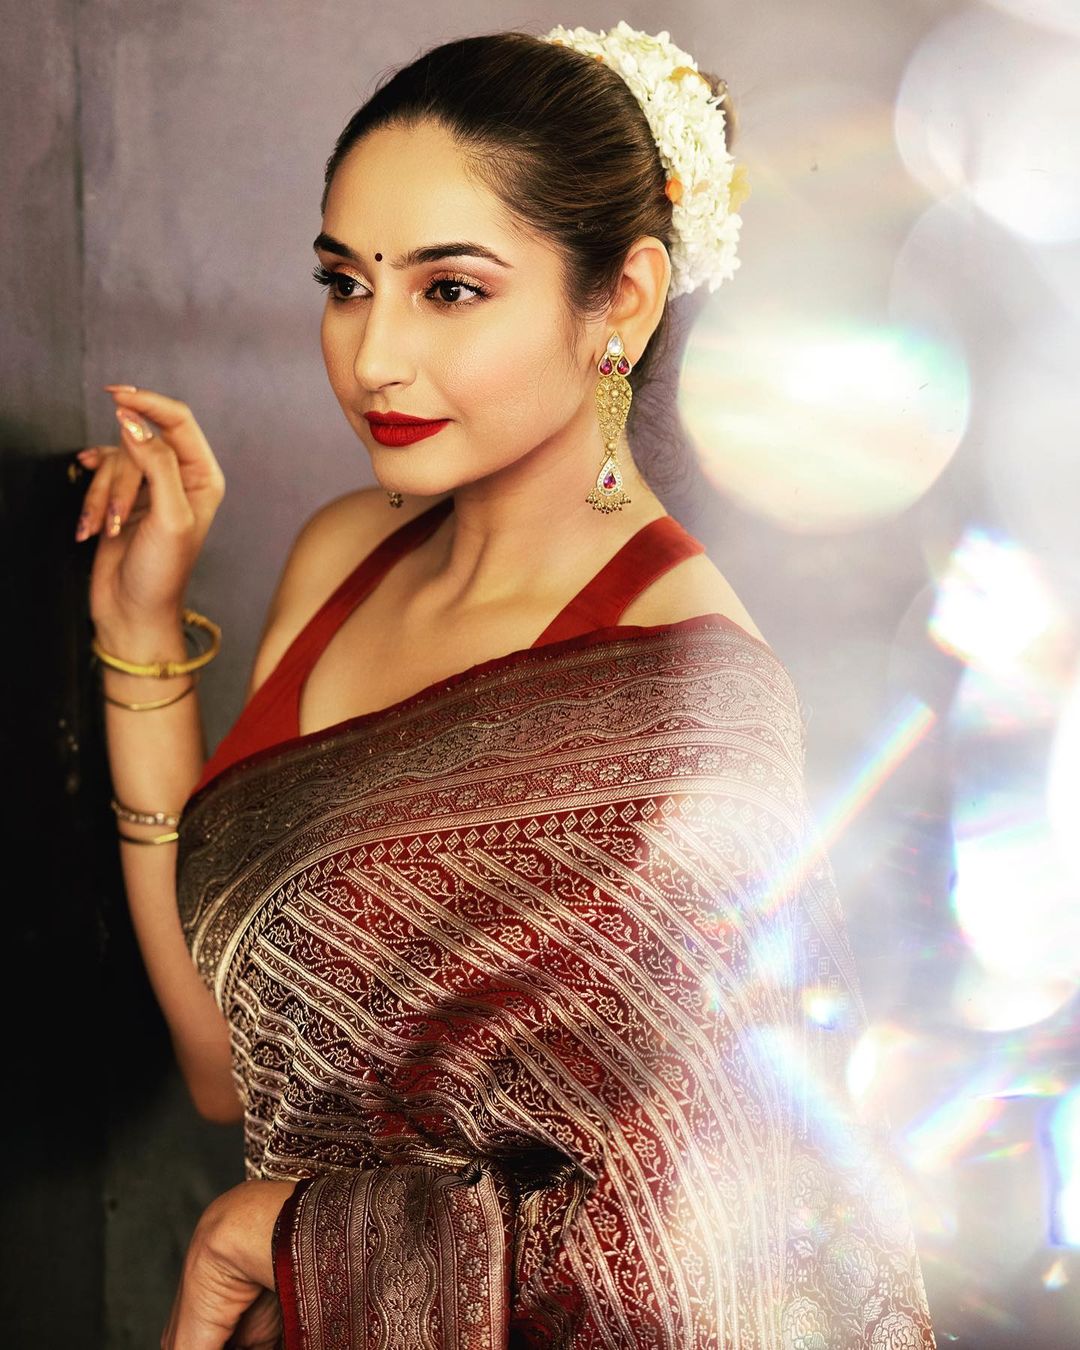 Actress ragini dwivedi melts our hearts with her classy looks-Actressragini, Ragini Dwivedi, Raginidwivedi Photos,Spicy Hot Pics,Images,High Resolution WallPapers Download